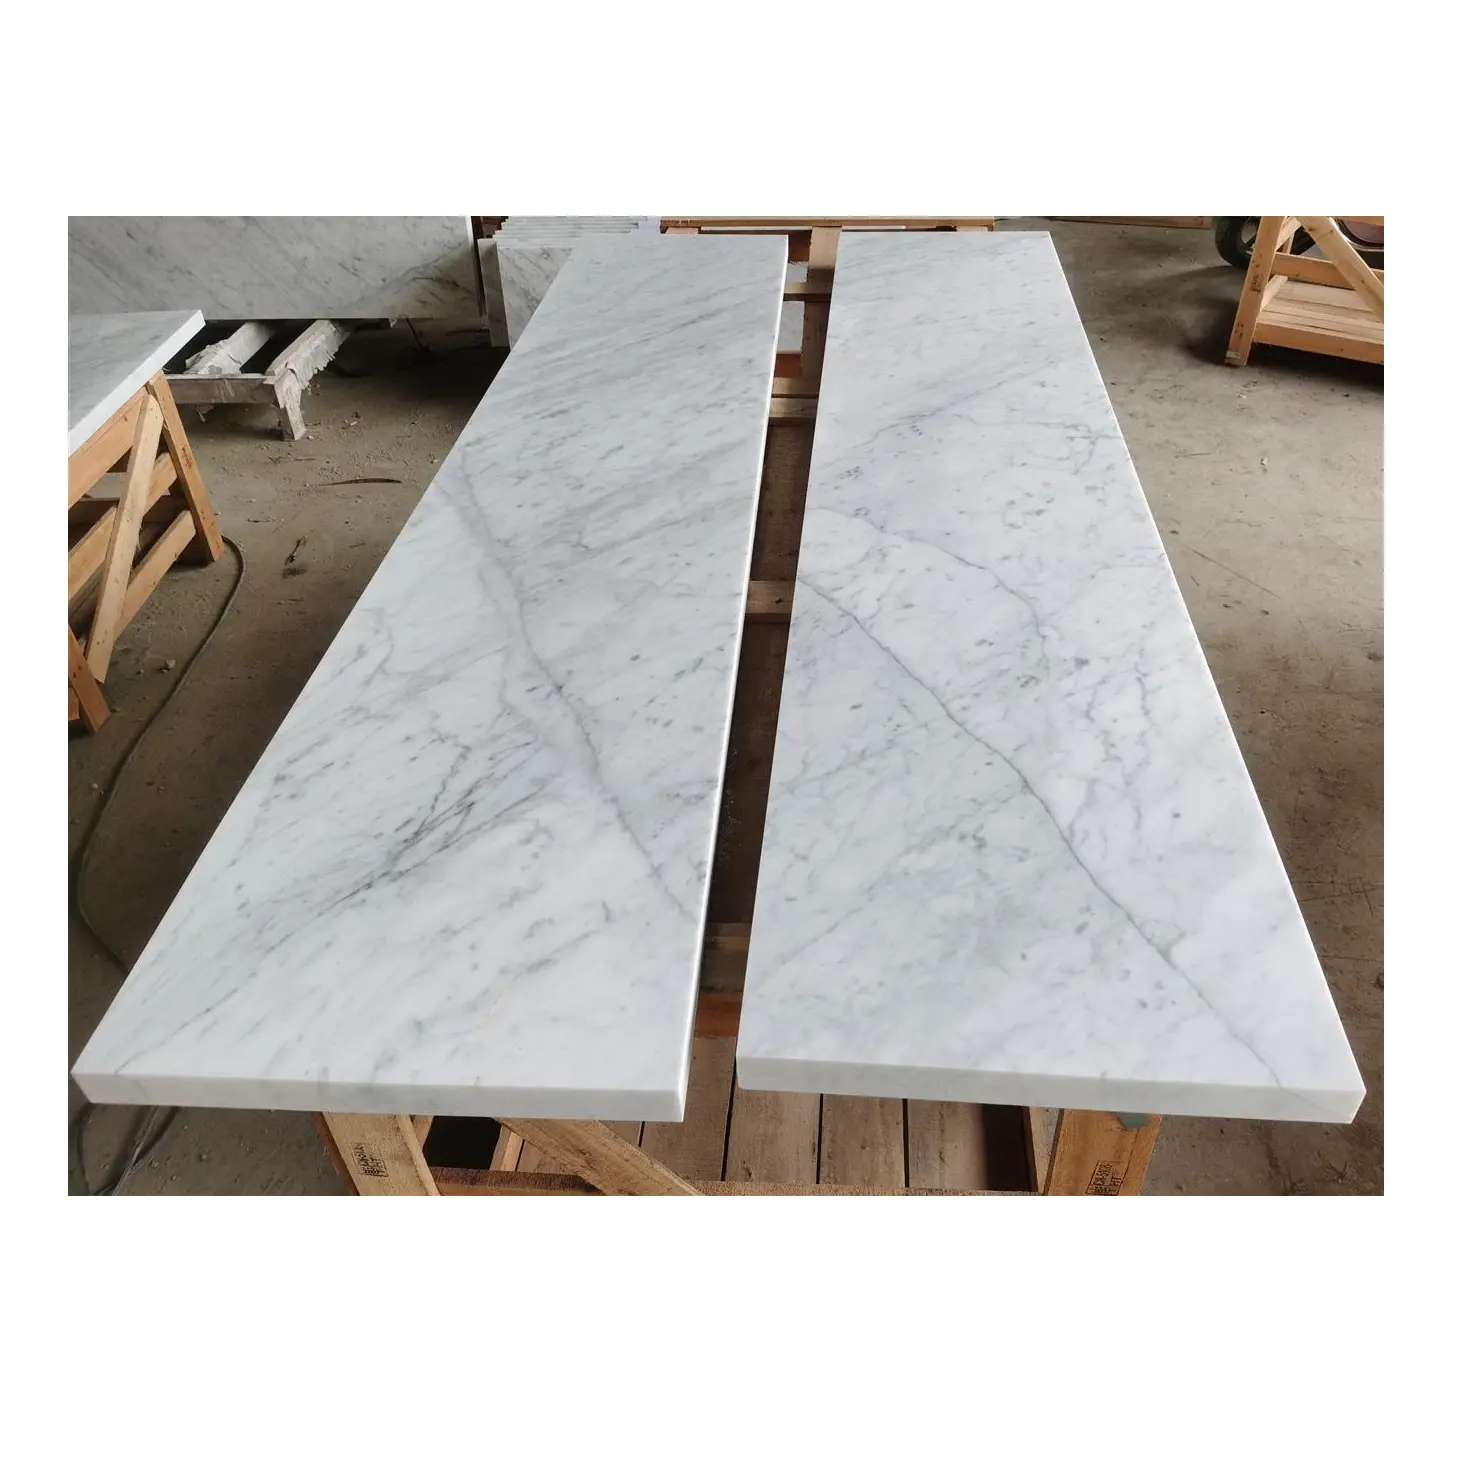 Natural Italy Carrara White Marble Tiles Interior Stone Stair Steps Riser And Treads